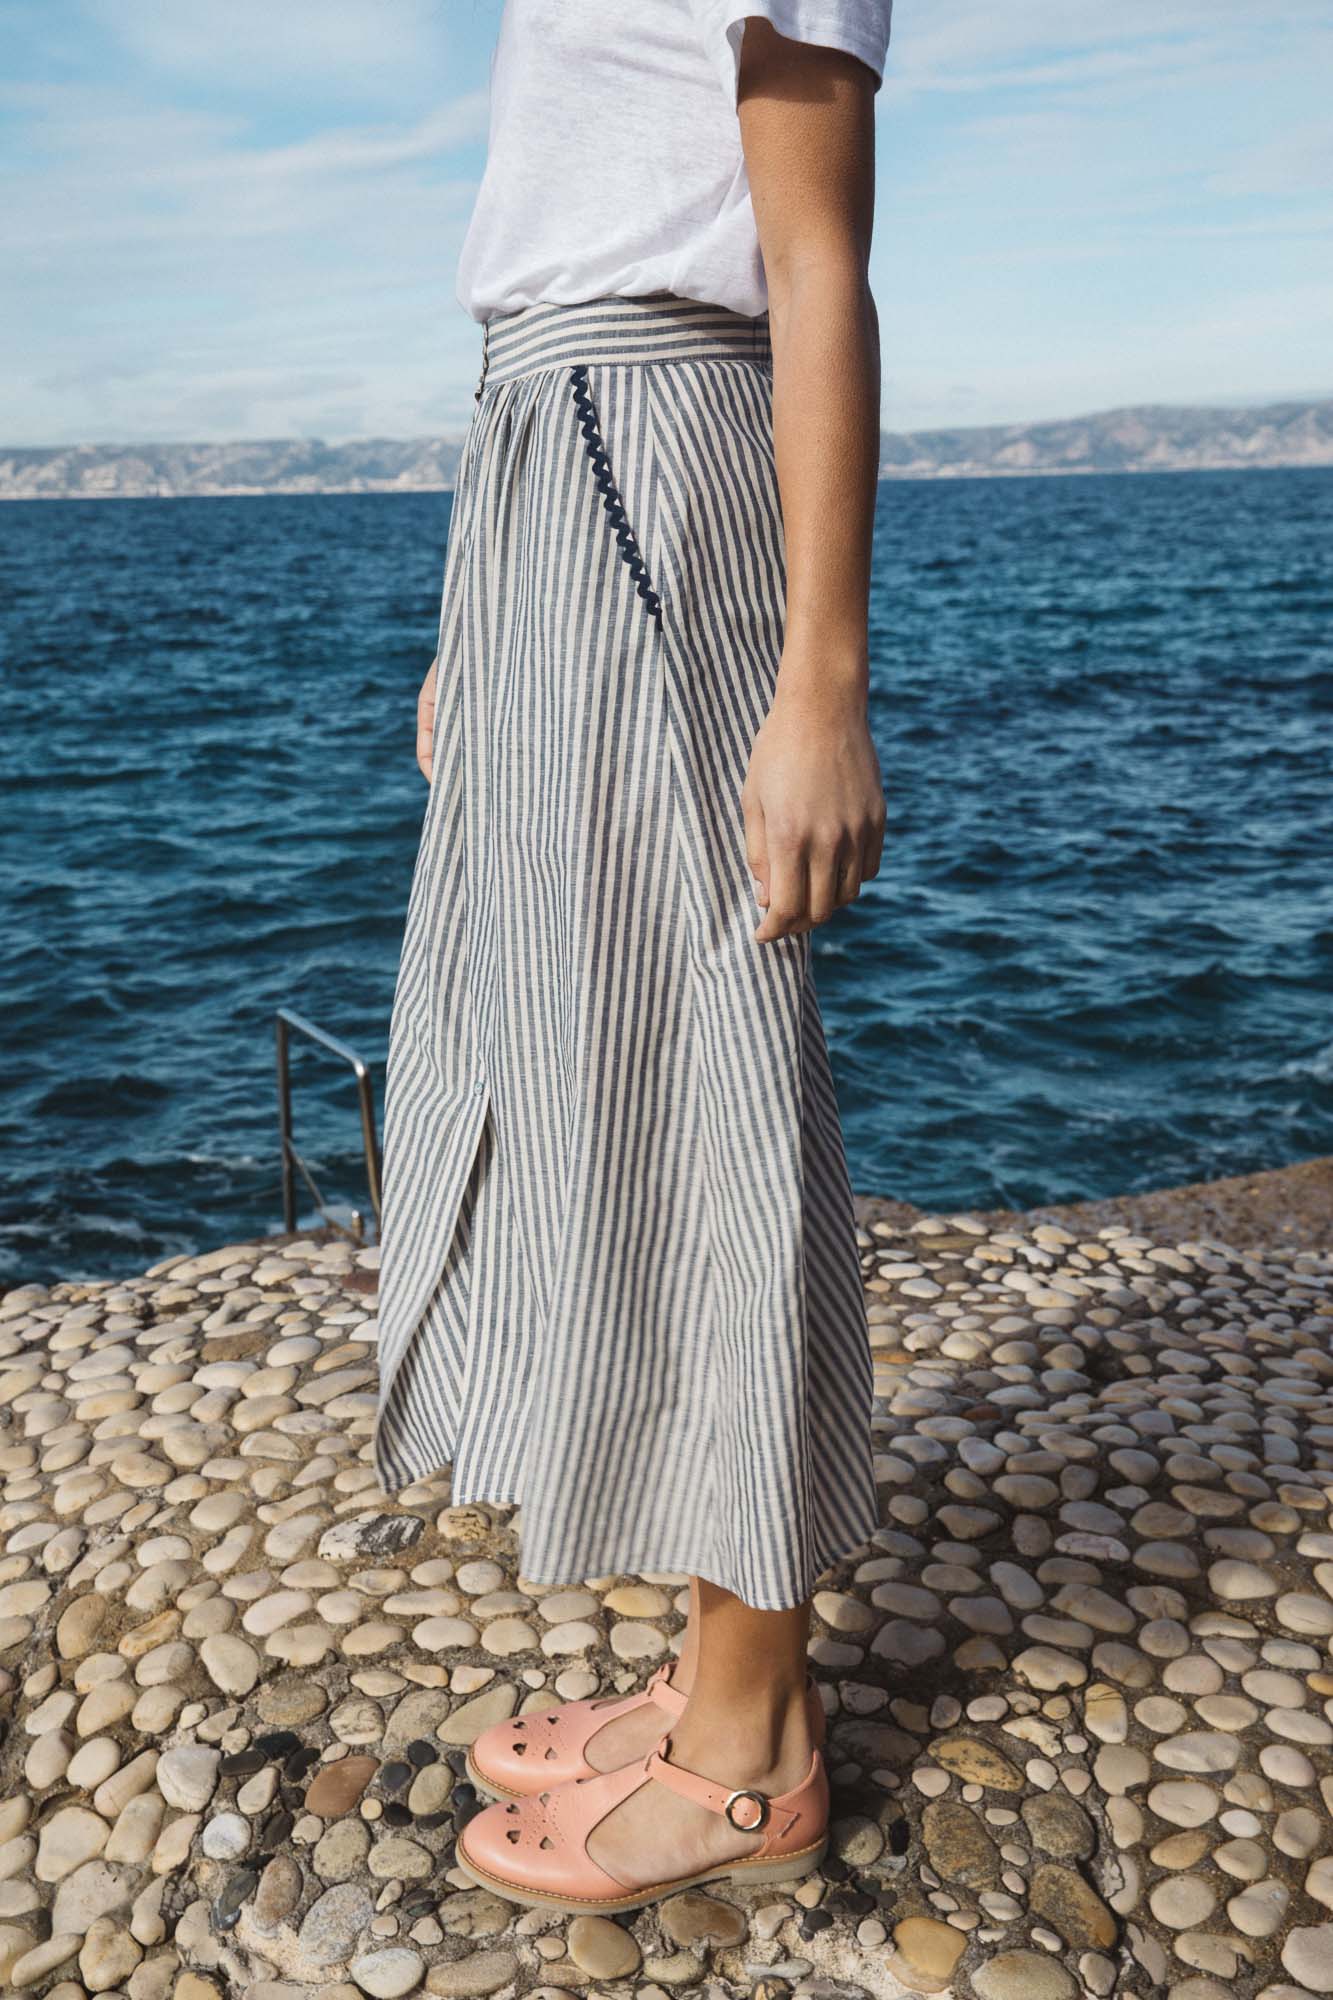 Blue and gray striped Sally skirt